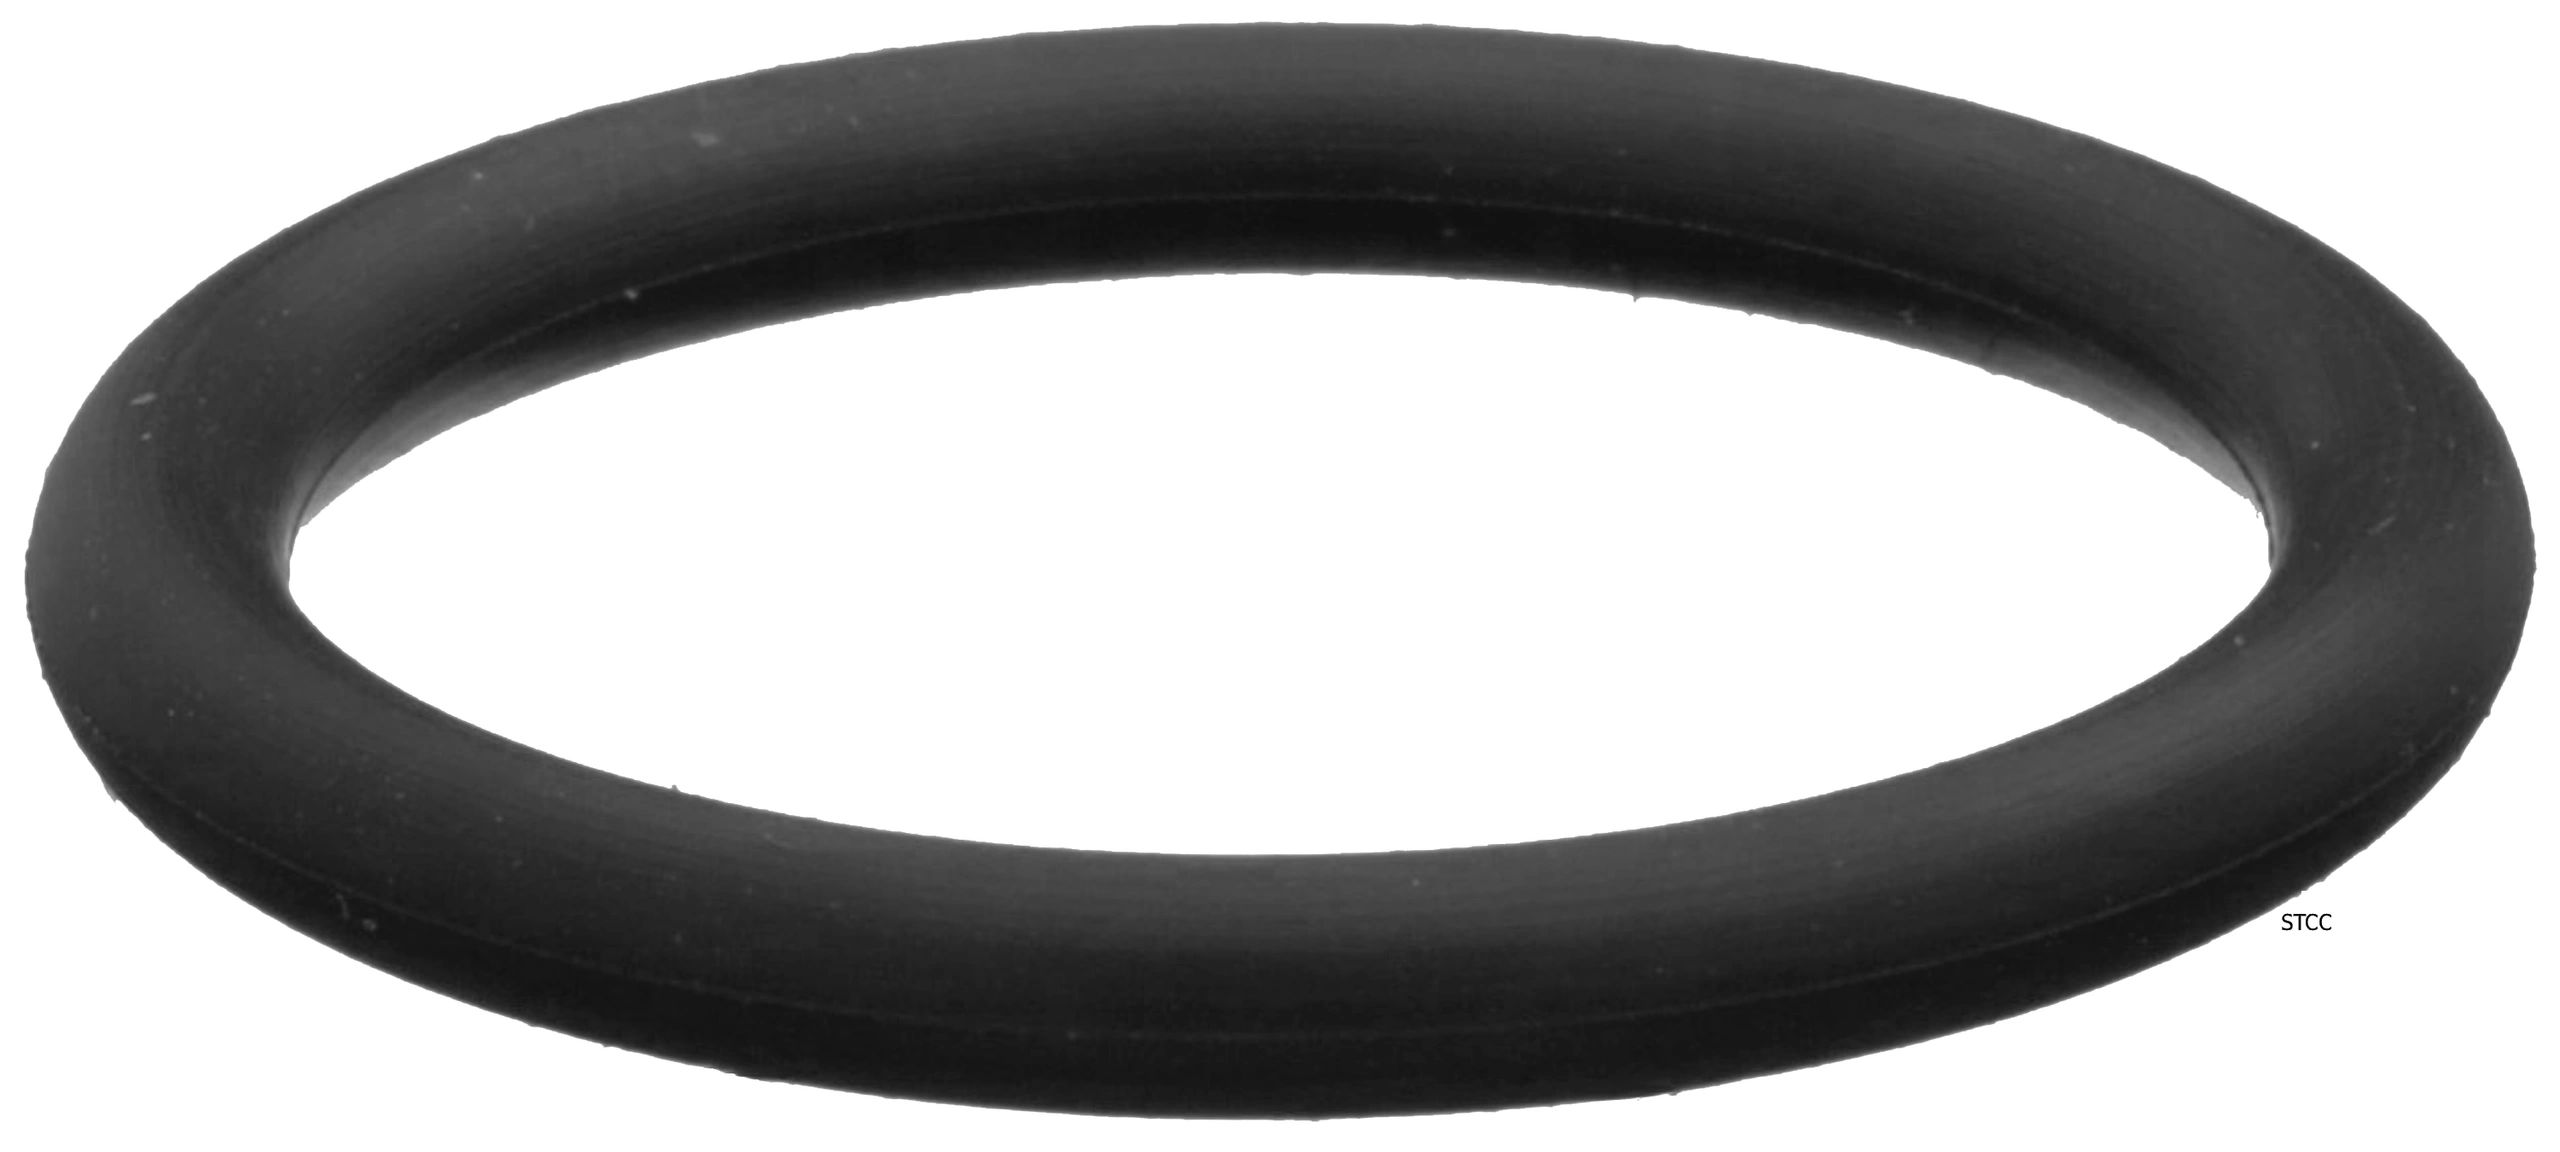 1.66 ID Sterling Seal CRG7106.1250.125.150X100 7106 Rubber 60 Durometer Ring Gasket 1/8 Thick of NJ Pack of 100 1.66 ID 1-1/4 Pipe Size 1/8 Thick Supplied by Sur-Seal Inc Pressure Class 150# 1-1/4 Pipe Size Neoprene